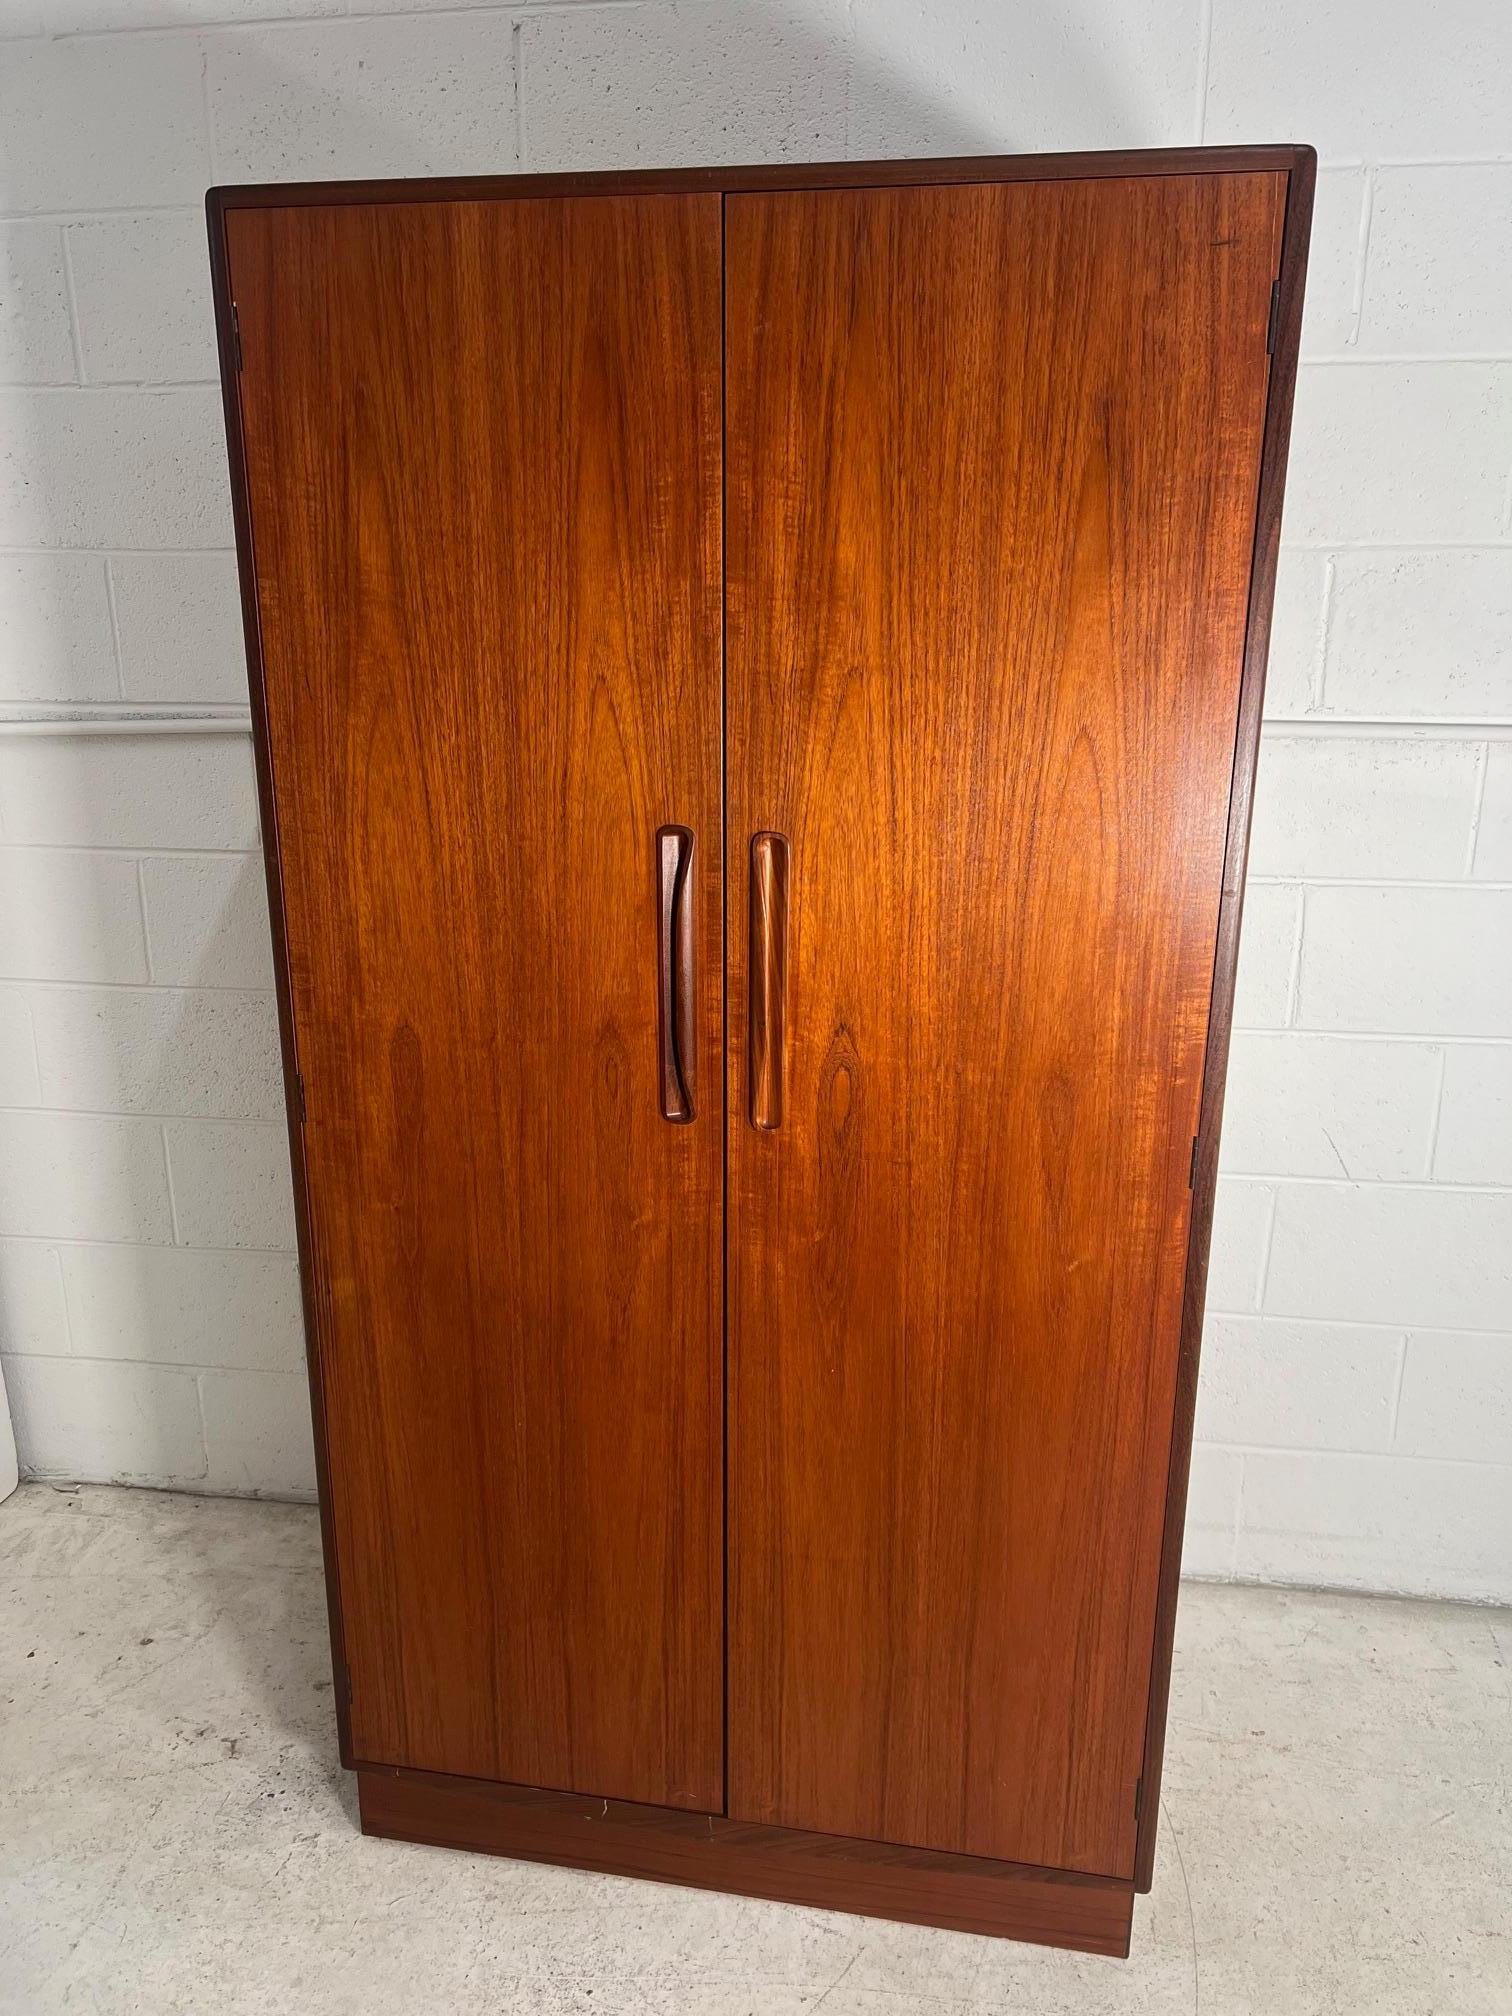 Amazing teak wardrobe by G Plan. Designed in the 1960s by Victor Bramwell Wilkins for G Plan's Fresco Range. Danish Modern in style.
Two door wardrobe with half hanging space on the left side and shelves and drawer space on the right. Top drawer